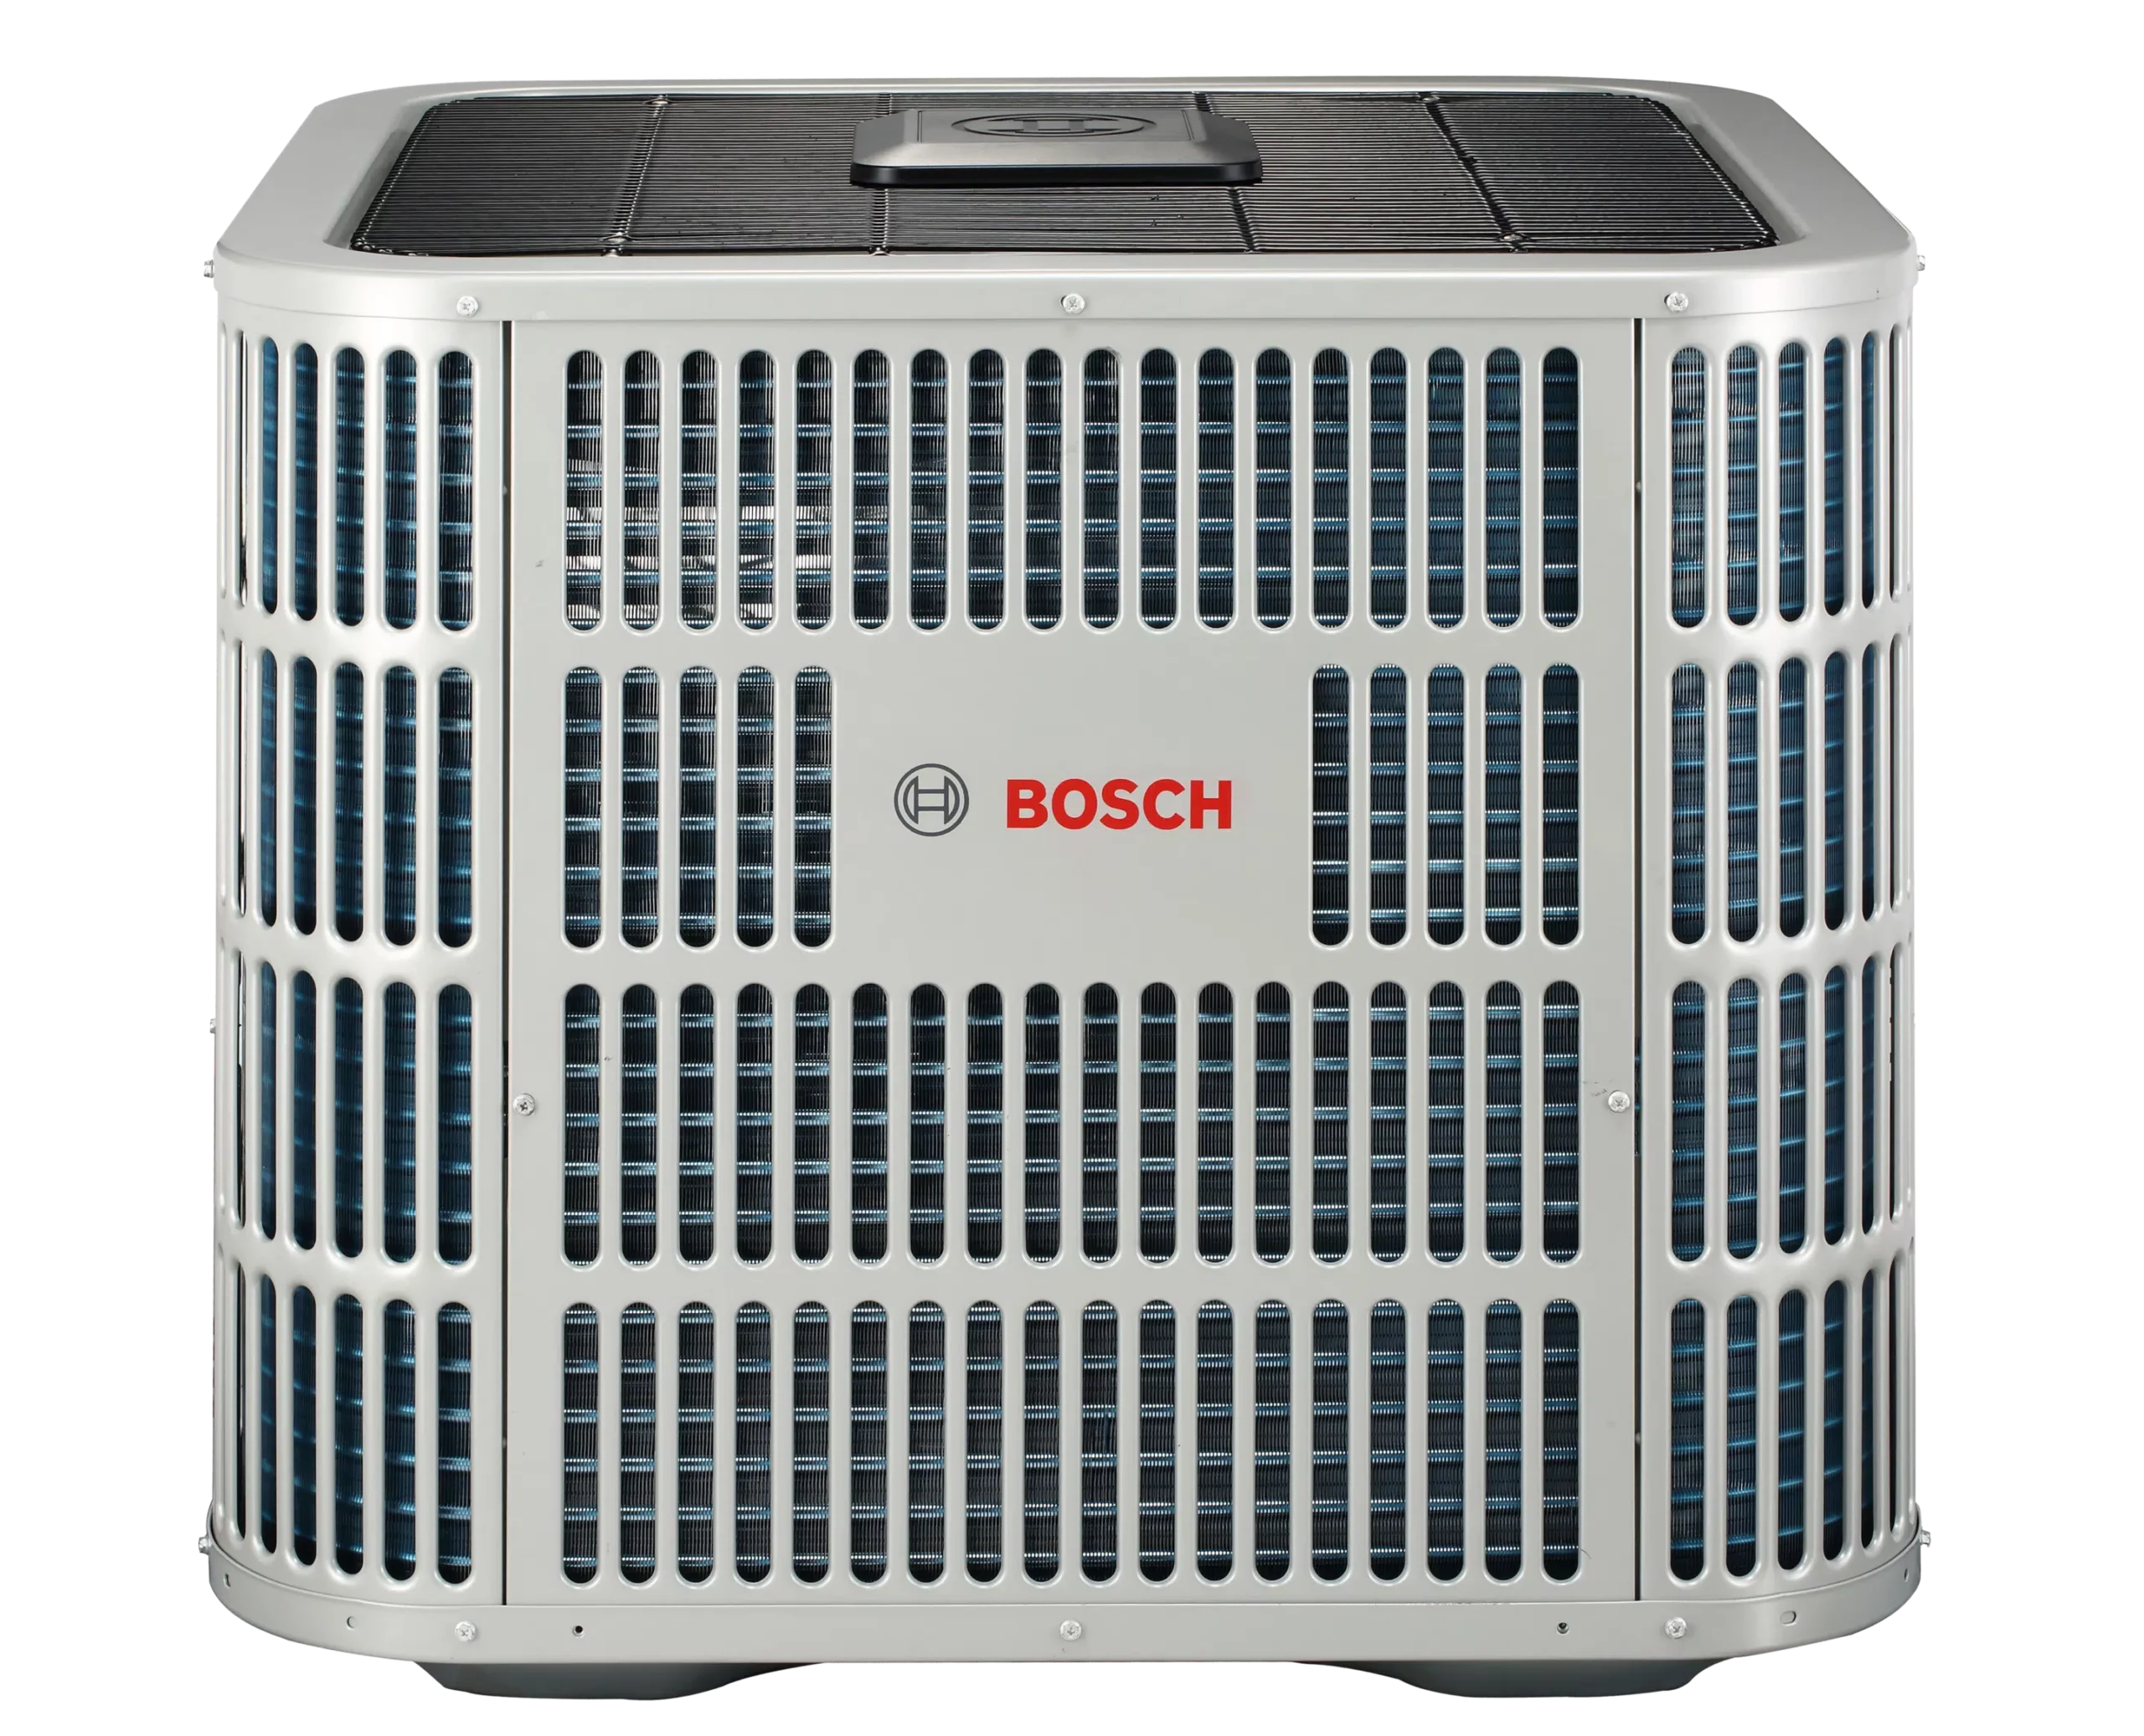 BOSCH IDS 2.0 Central Heat Pump 20 SEER With A-Coil - 2/3 Ton